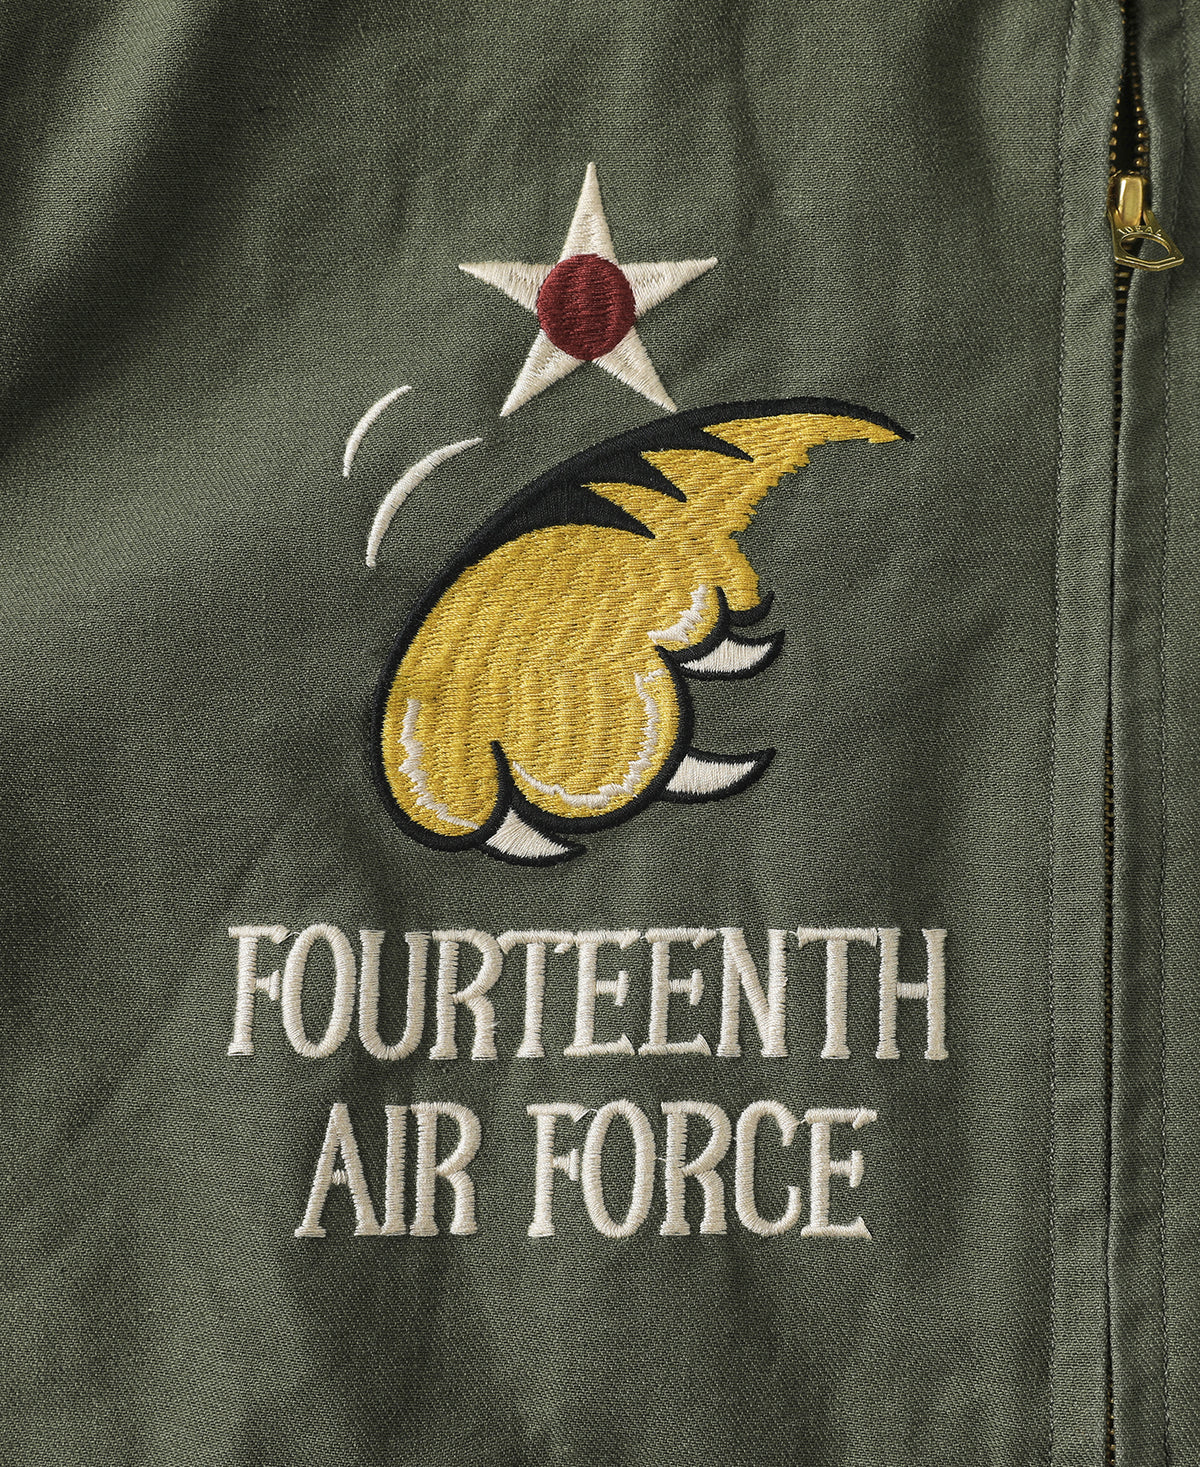 USAAF 14th Air Force Flying Tigers Embroidery Jacket